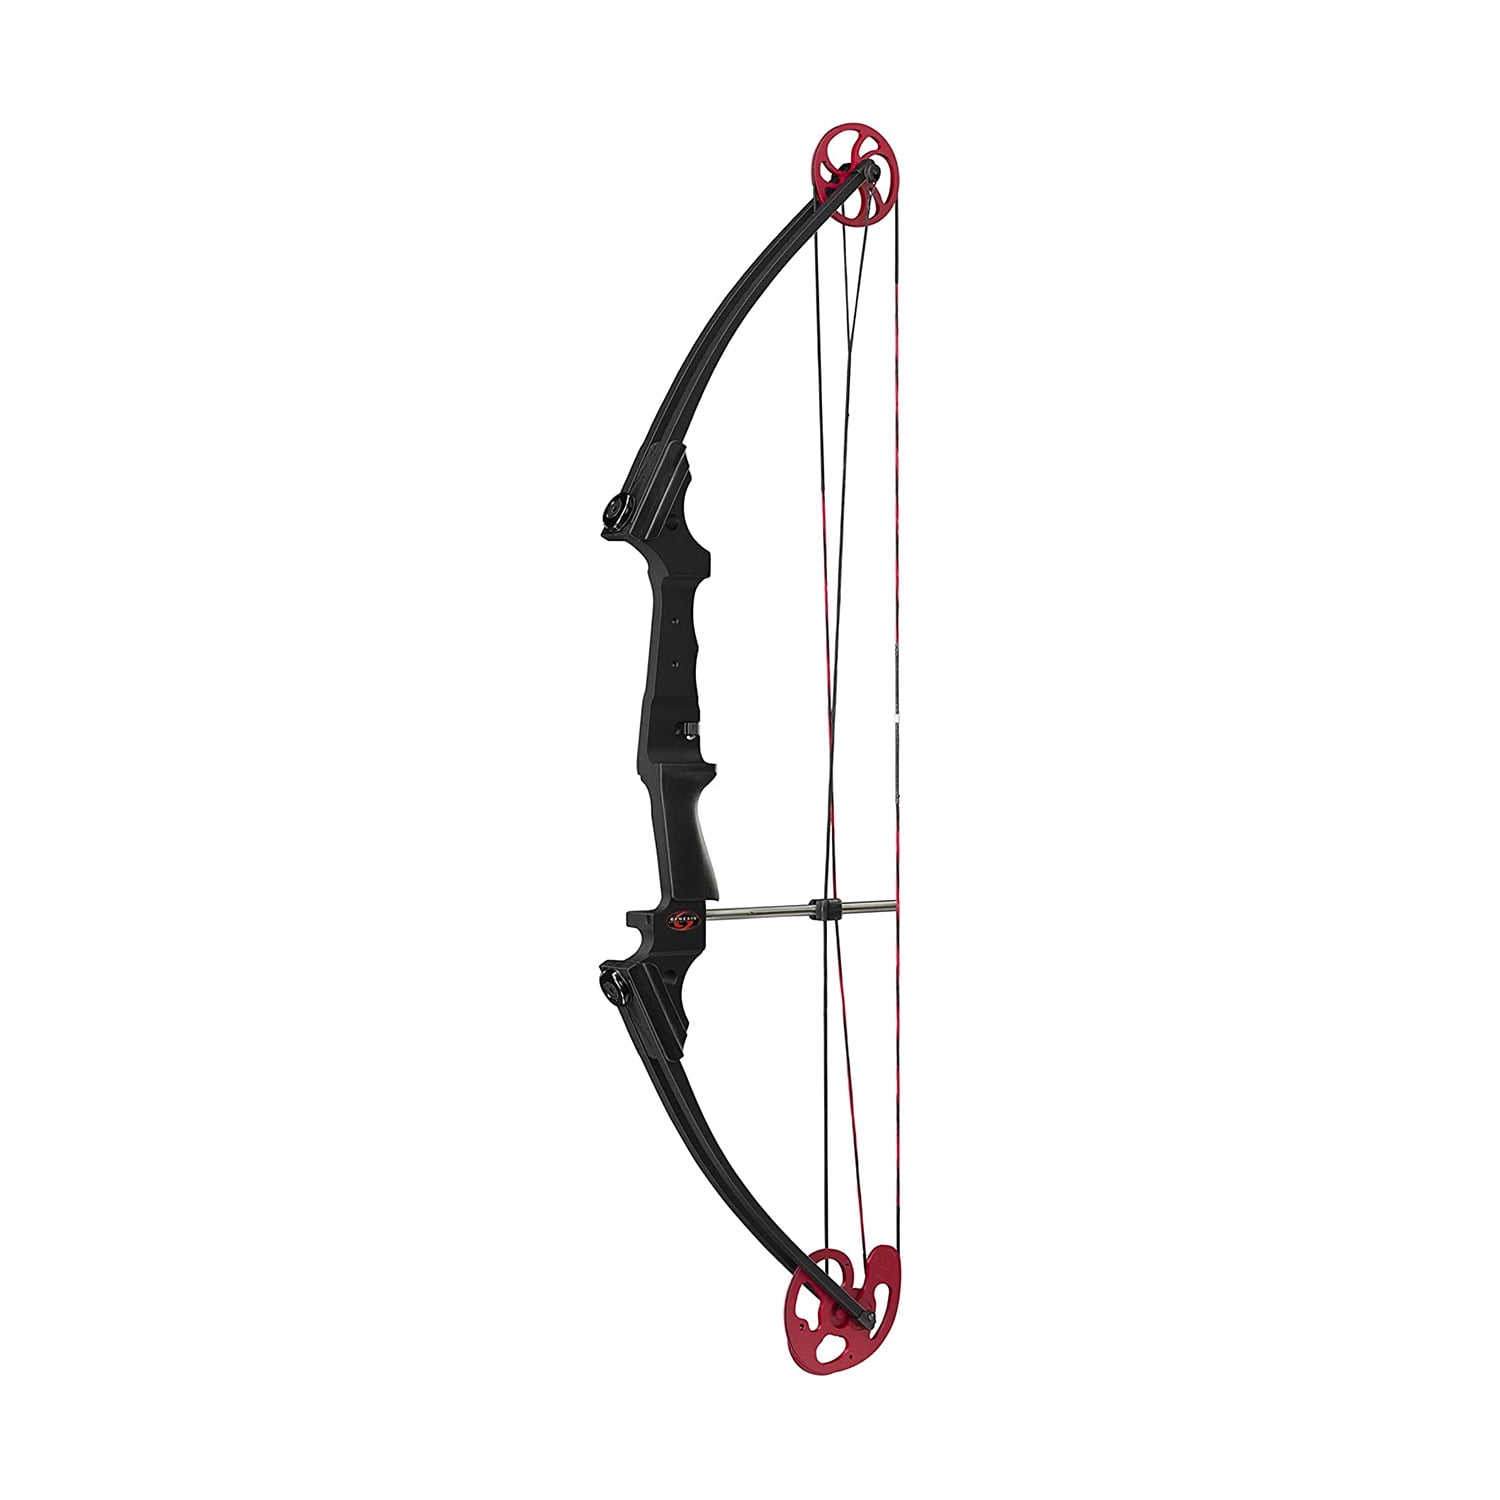 20-70LB Archery Compound Bows Sets Shooting Shooting Takedown Left/Right Hand 